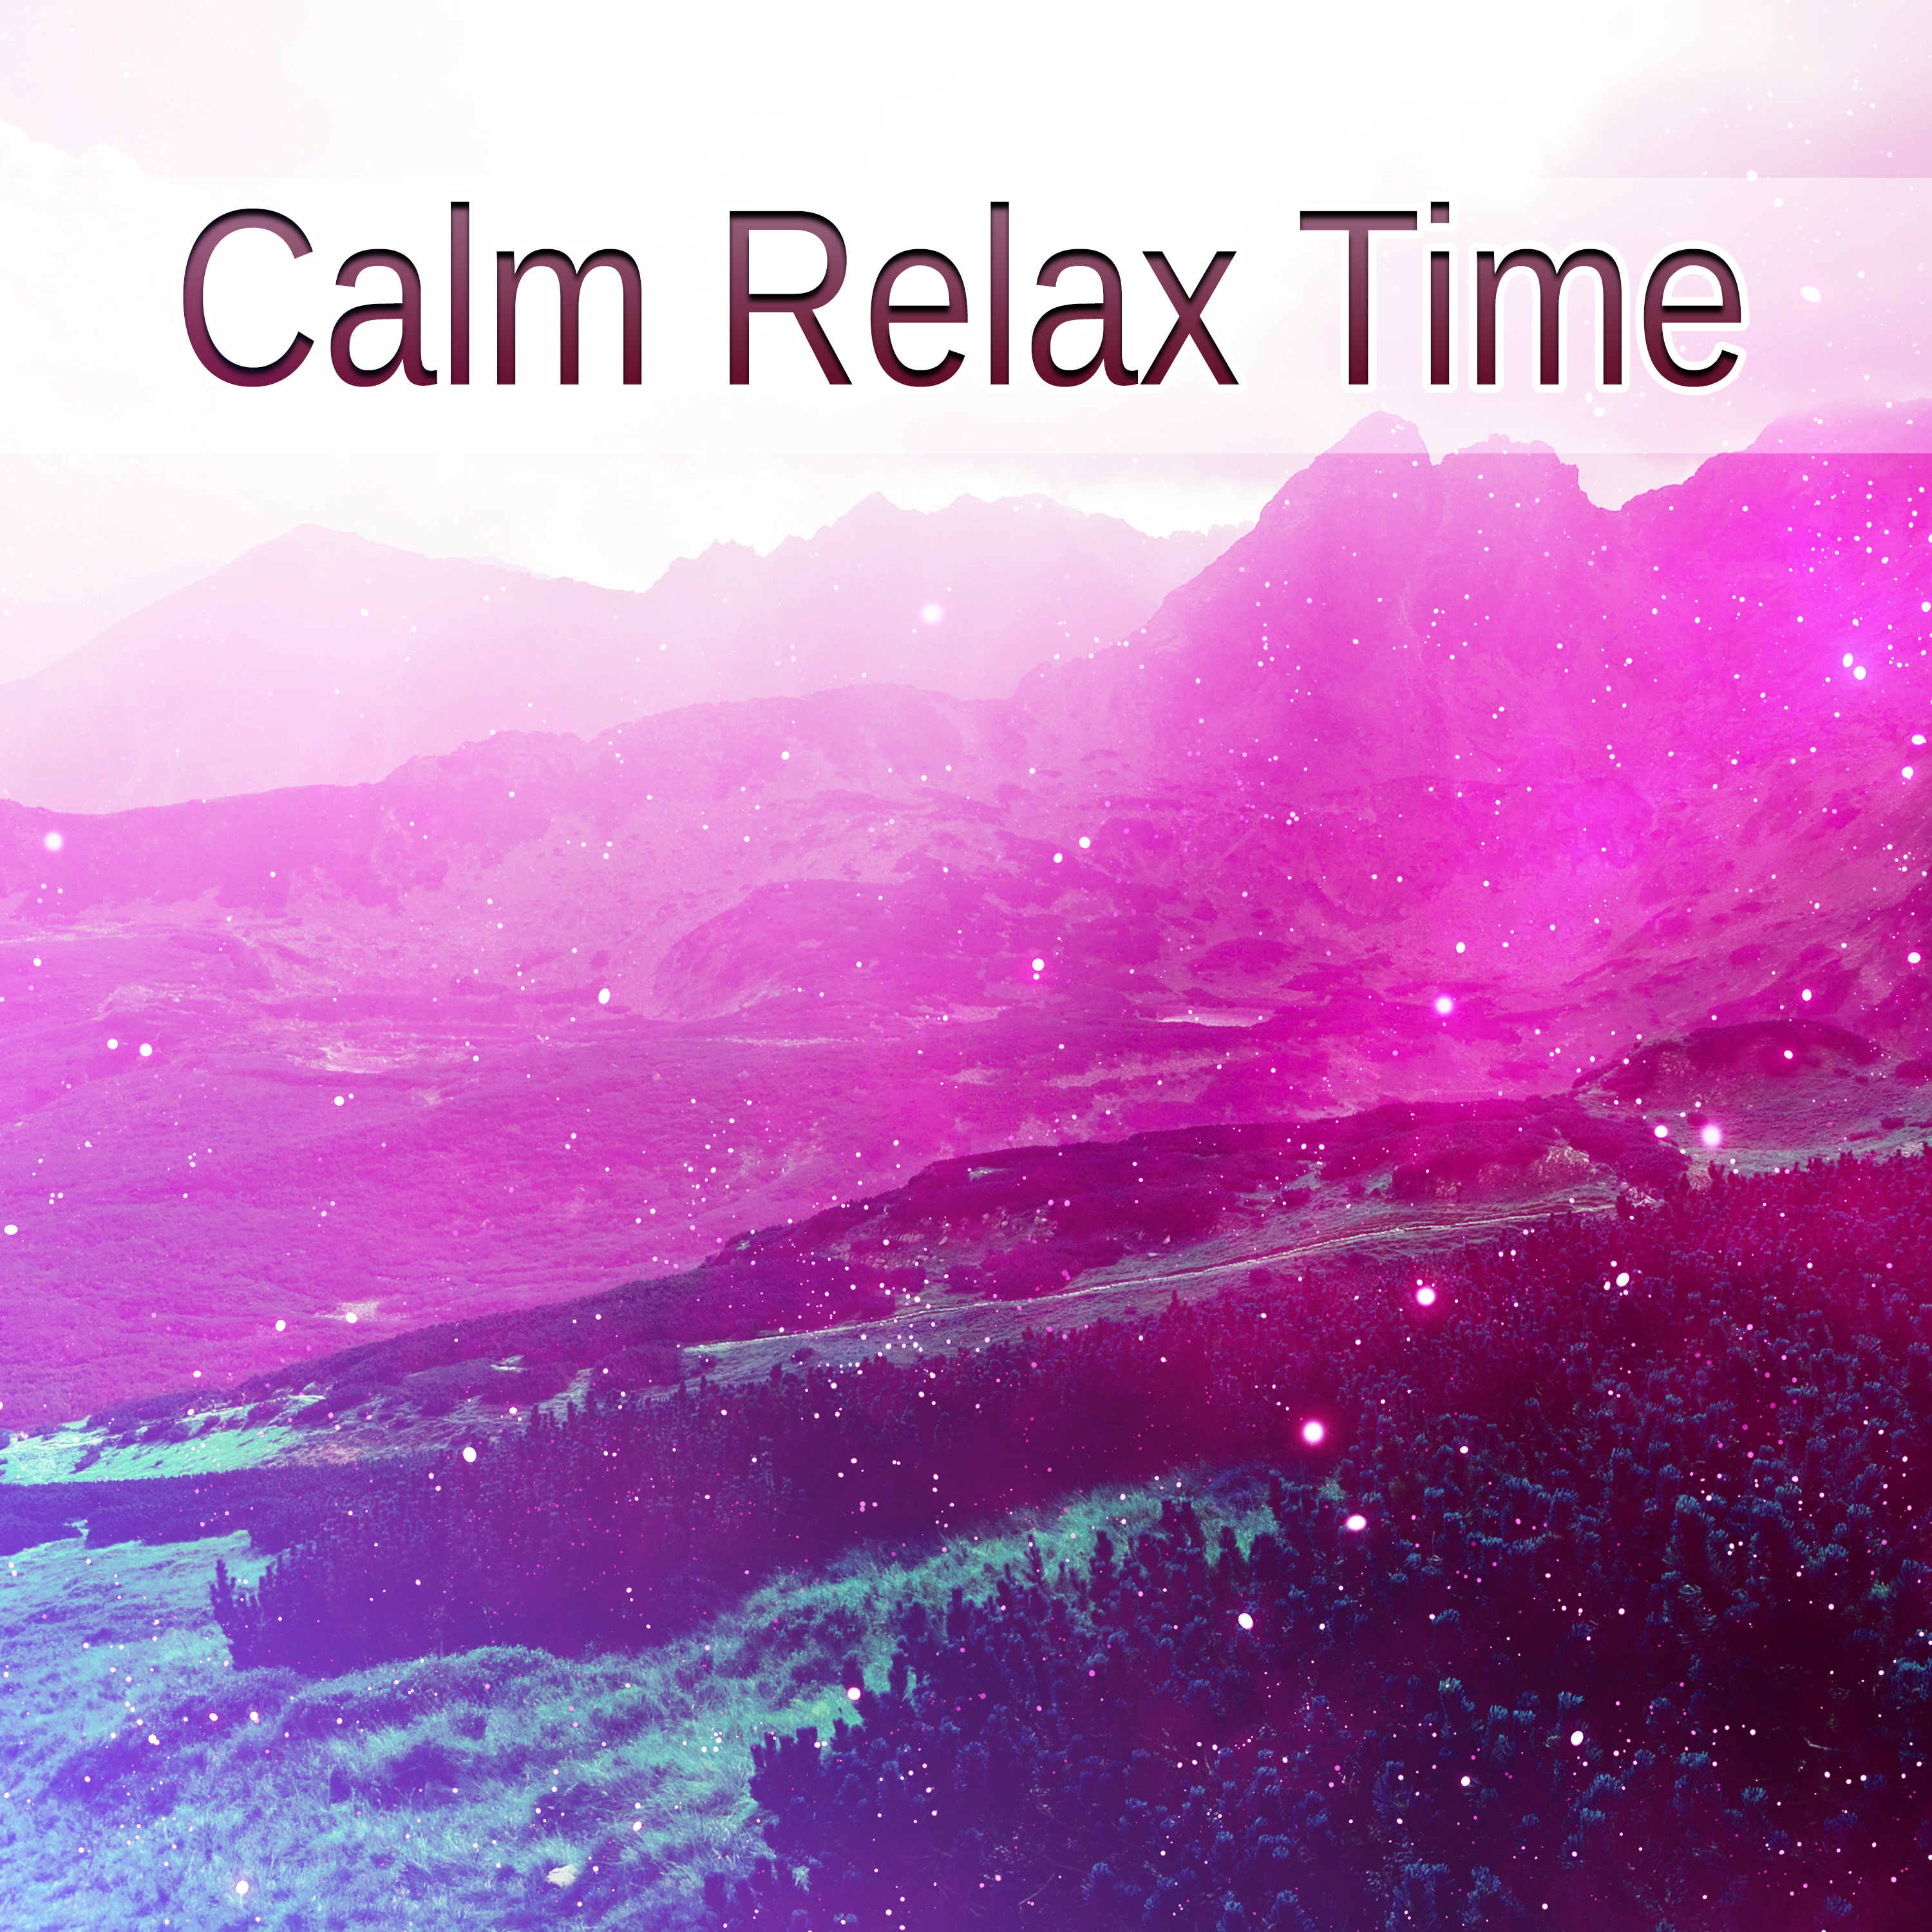 Calm Relax Time  Relaxing Music, Soft Sounds of Nature, New Age Music, Relax, Rest, Stress Relief  Reduce Anxiety